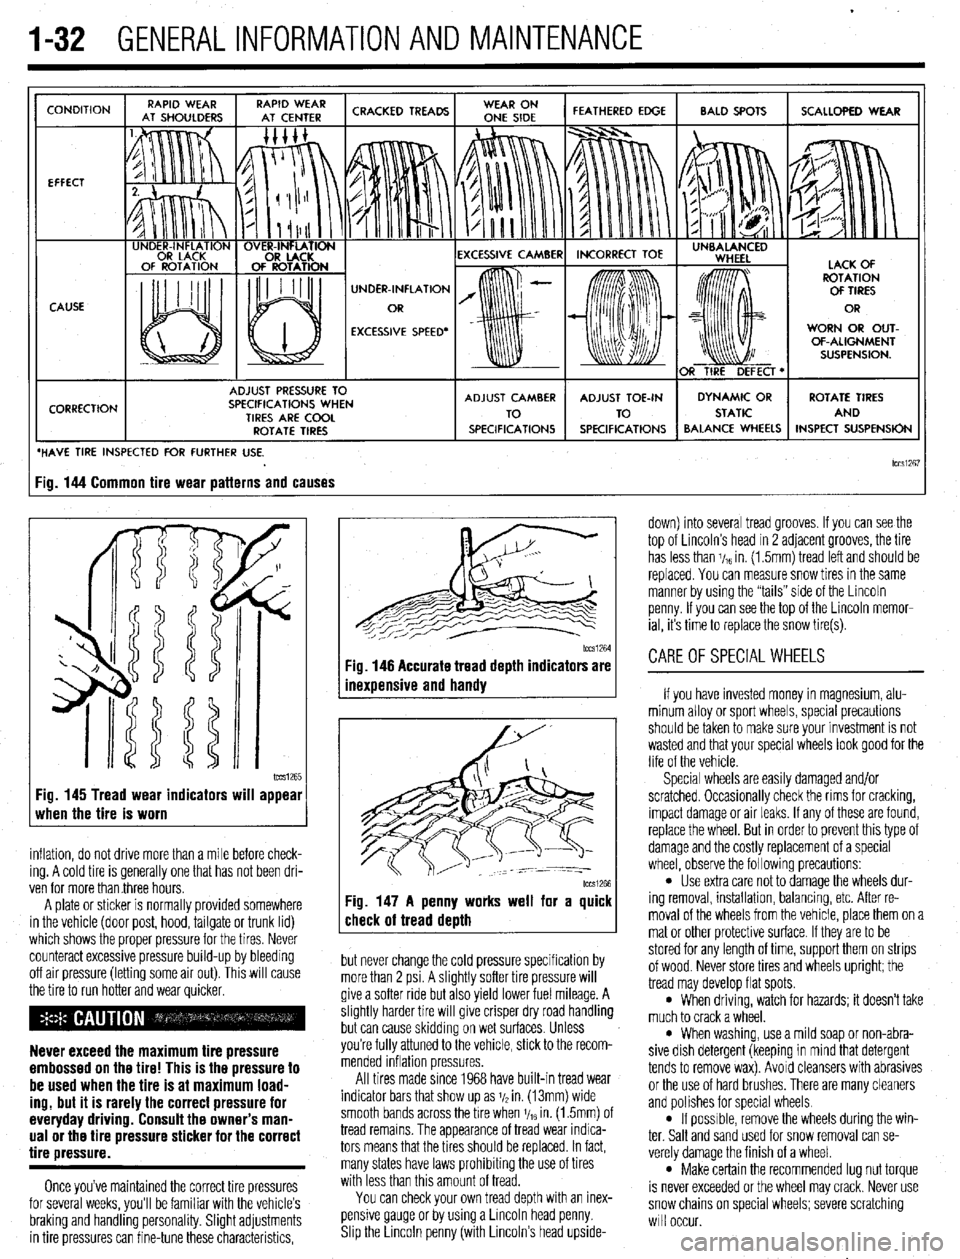 MITSUBISHI DIAMANTE 1900  Repair Manual . 
1-32 GENERALINFORMATIONAND MAINTENANCE 
CONDITION 
EFFECT 
CAUSE 
CORRECTION UNDER-INFLATION 
EXCESSIVE SPEED’ WORN OR OUT- 
OF-ALIGNMENT 
ADJUST PRESSURE TO 
SPECIFICATIONS WHEN 
TIRES ARE COOL 